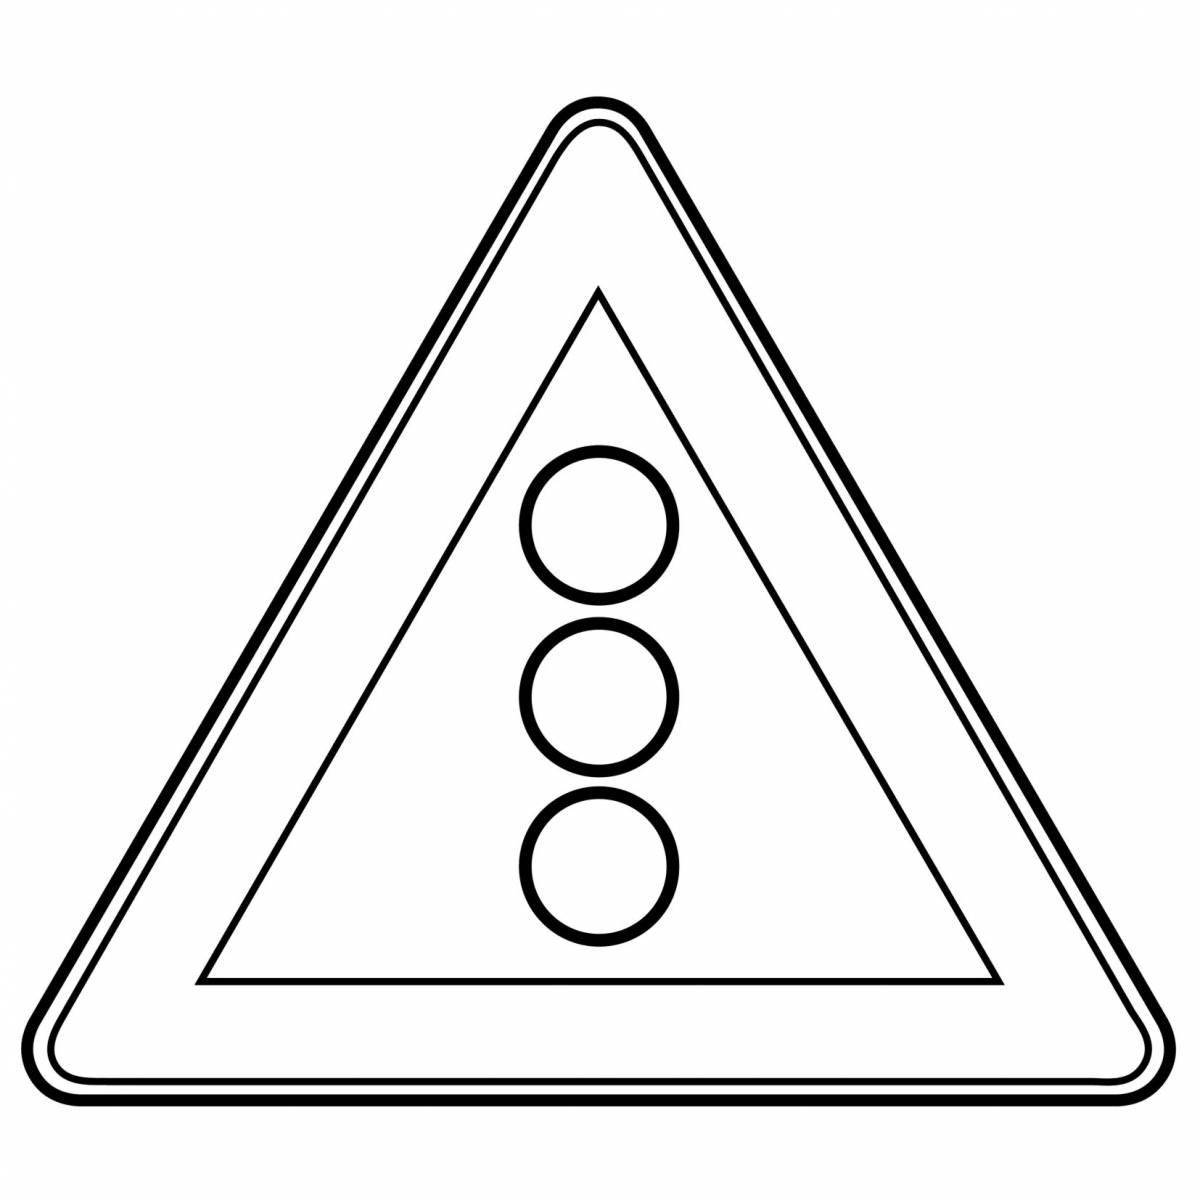 Coloring page cheerful caution children's traffic sign